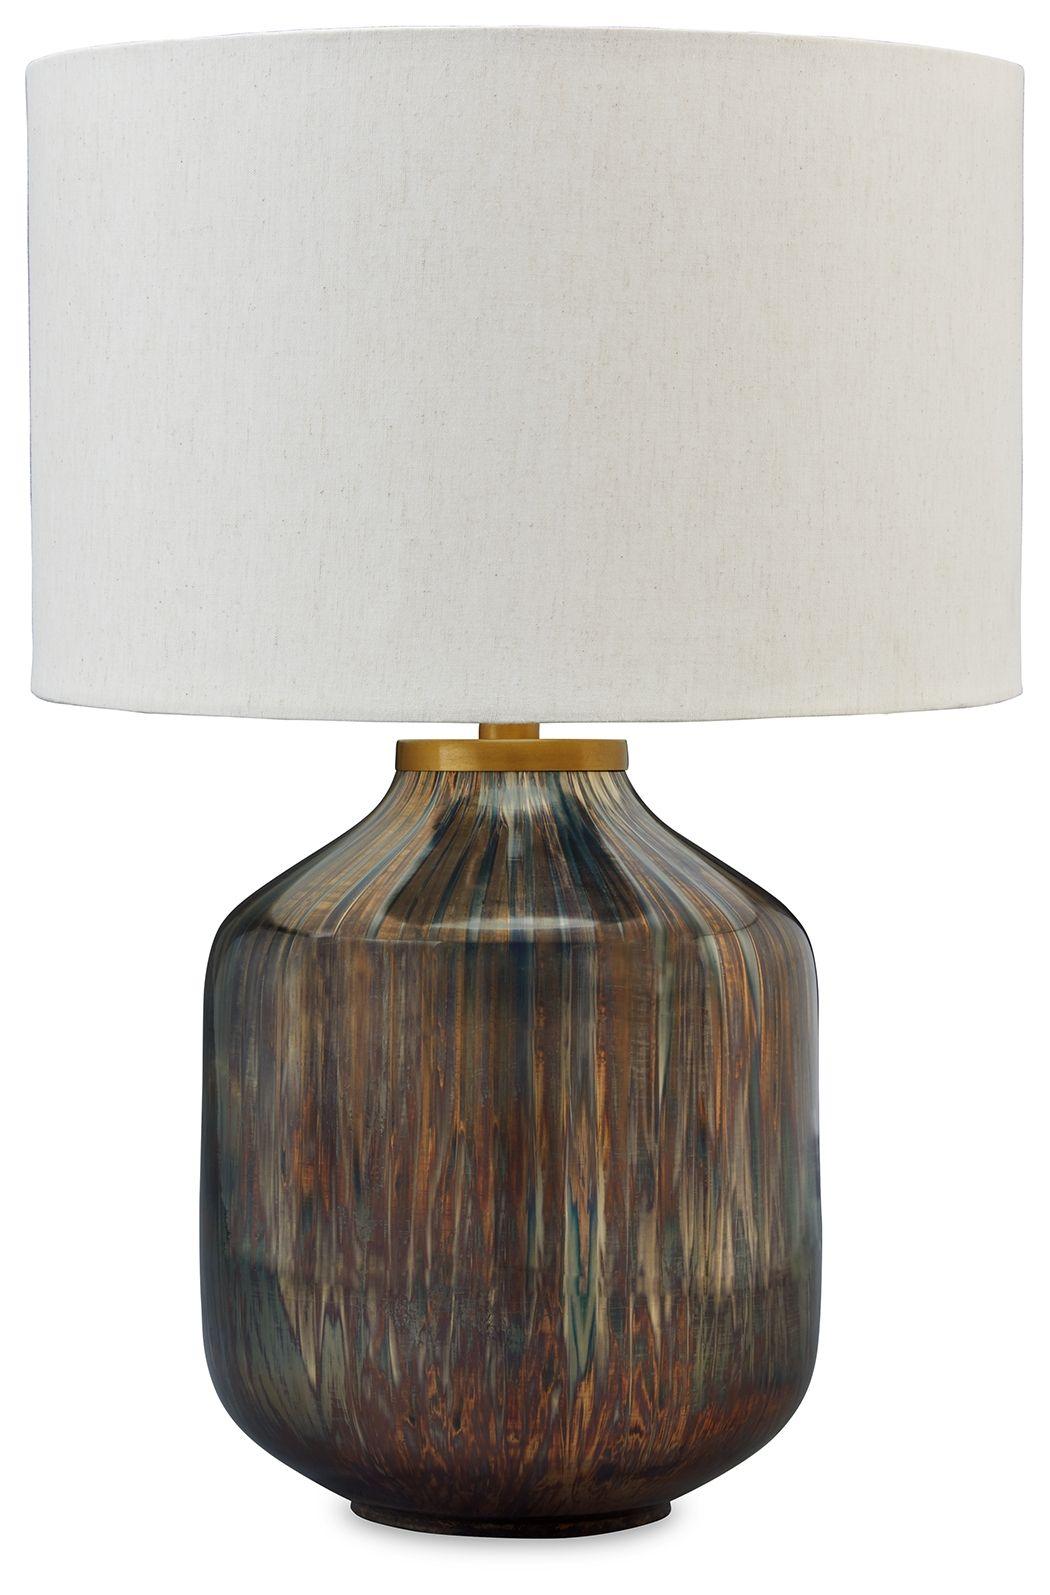 Jadstow - Black / Silver Finish - Glass Table Lamp Tony's Home Furnishings Furniture. Beds. Dressers. Sofas.